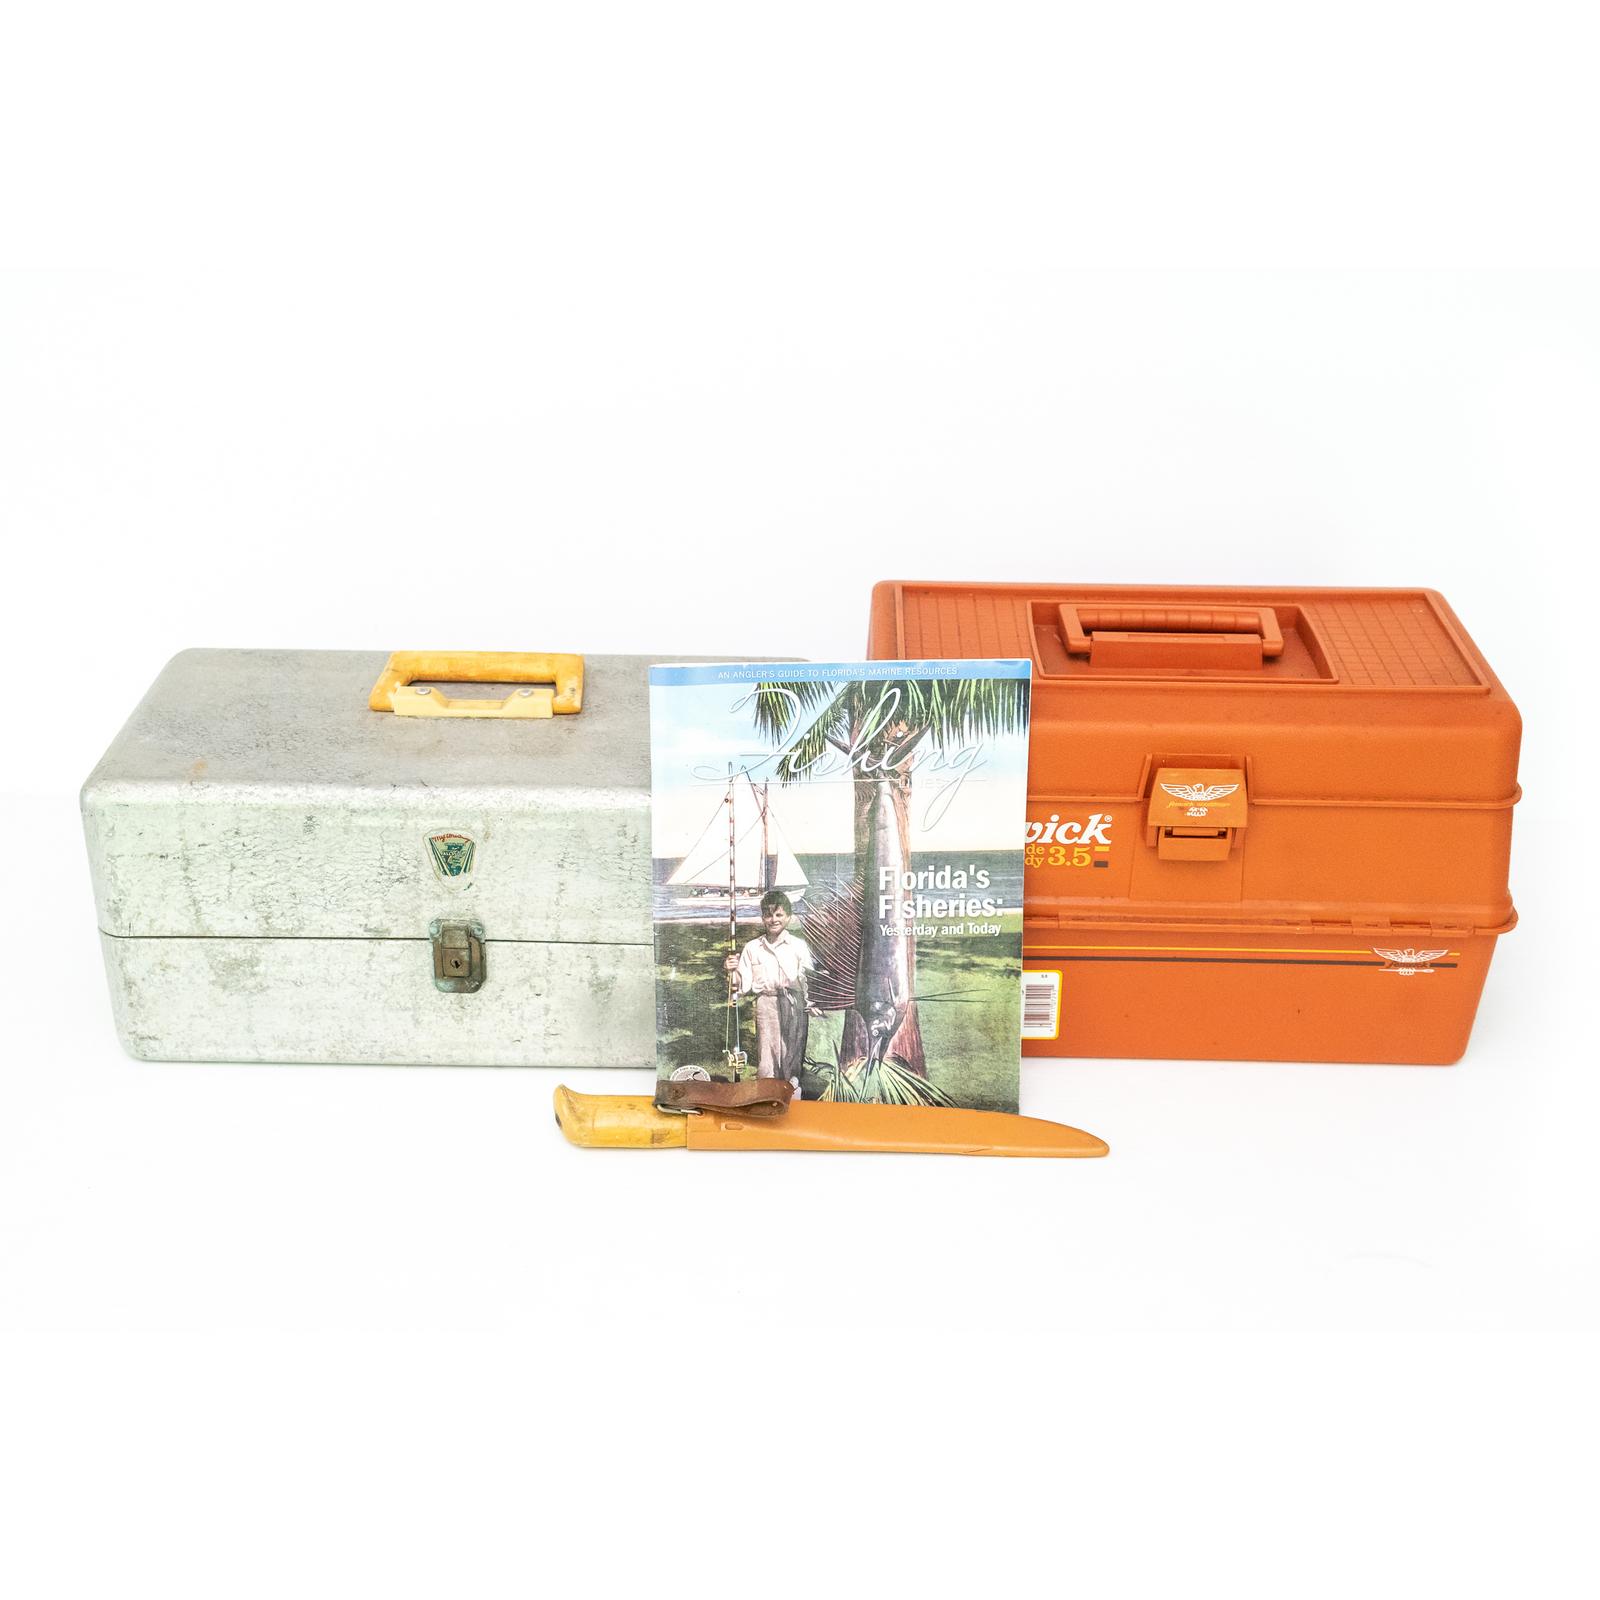 Falls City & Fenwick Fishing Tackle Boxes and Contents